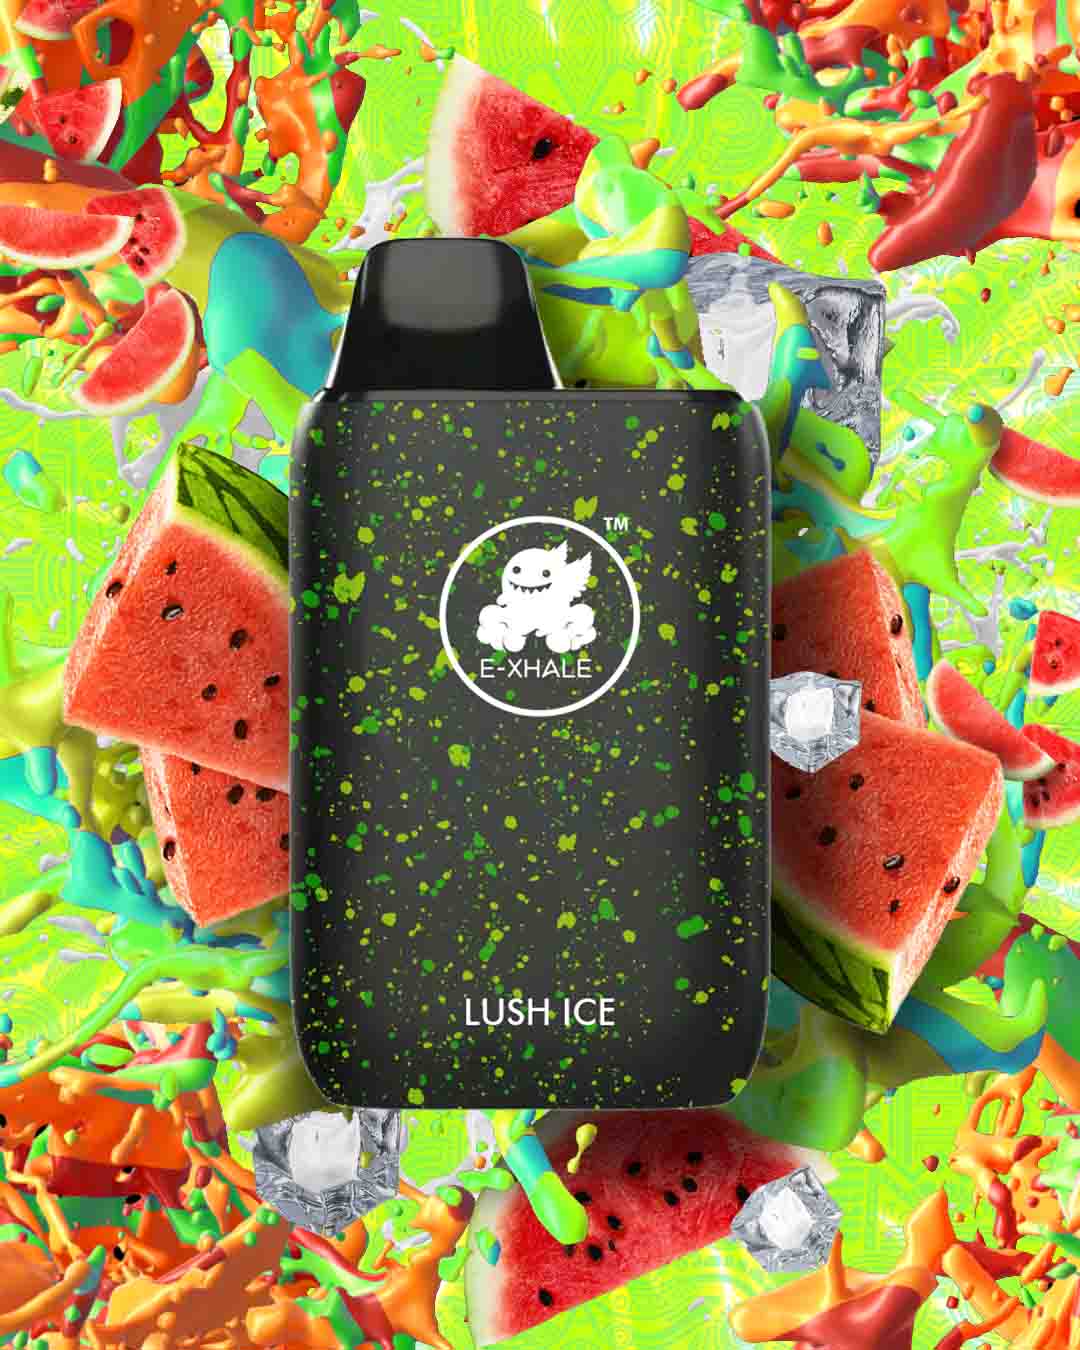 High-Puff Rechargeable Vape South Africa. Lush Ice: Watermelon and Ice. Cheapest and Highest Quality Vape South Africa. E-XHALE Disposable Vapes South Africa